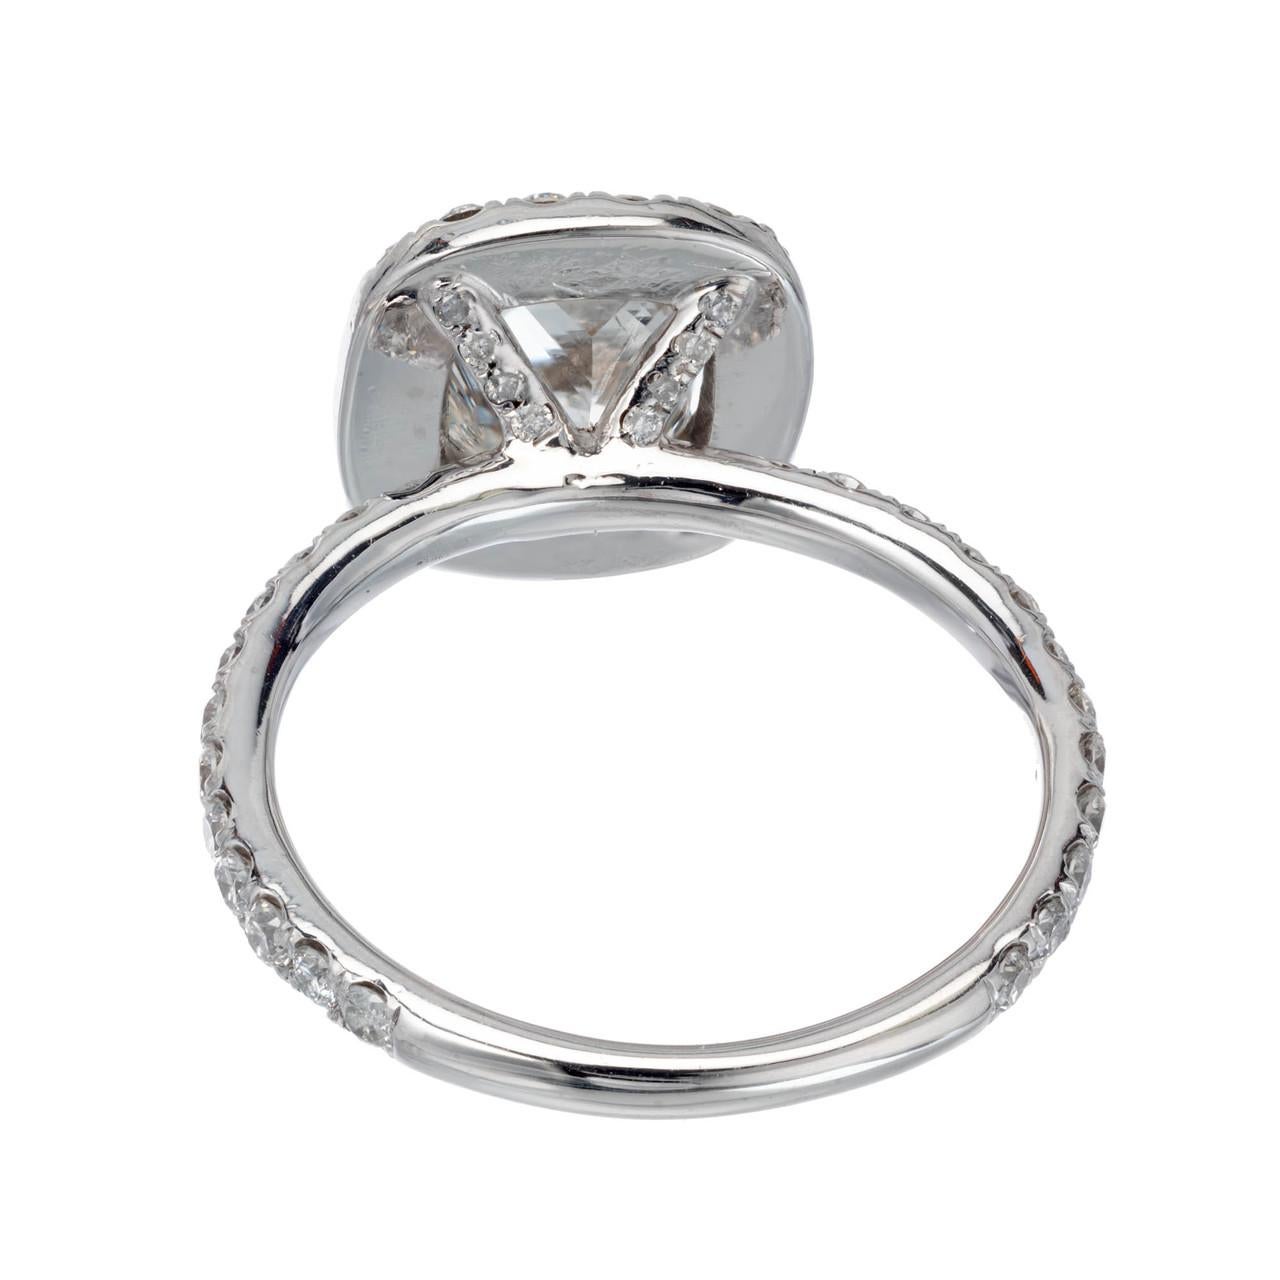 Radiant cut Diamond engagement ring. GIA certified center stone in a custom-made platinum diamond halo setting from the Peter Suchy Workshop. This design allows a wedding band to sit flush. 

1 radiant cut cornered rectangular H SI2, approx. 1.64cts